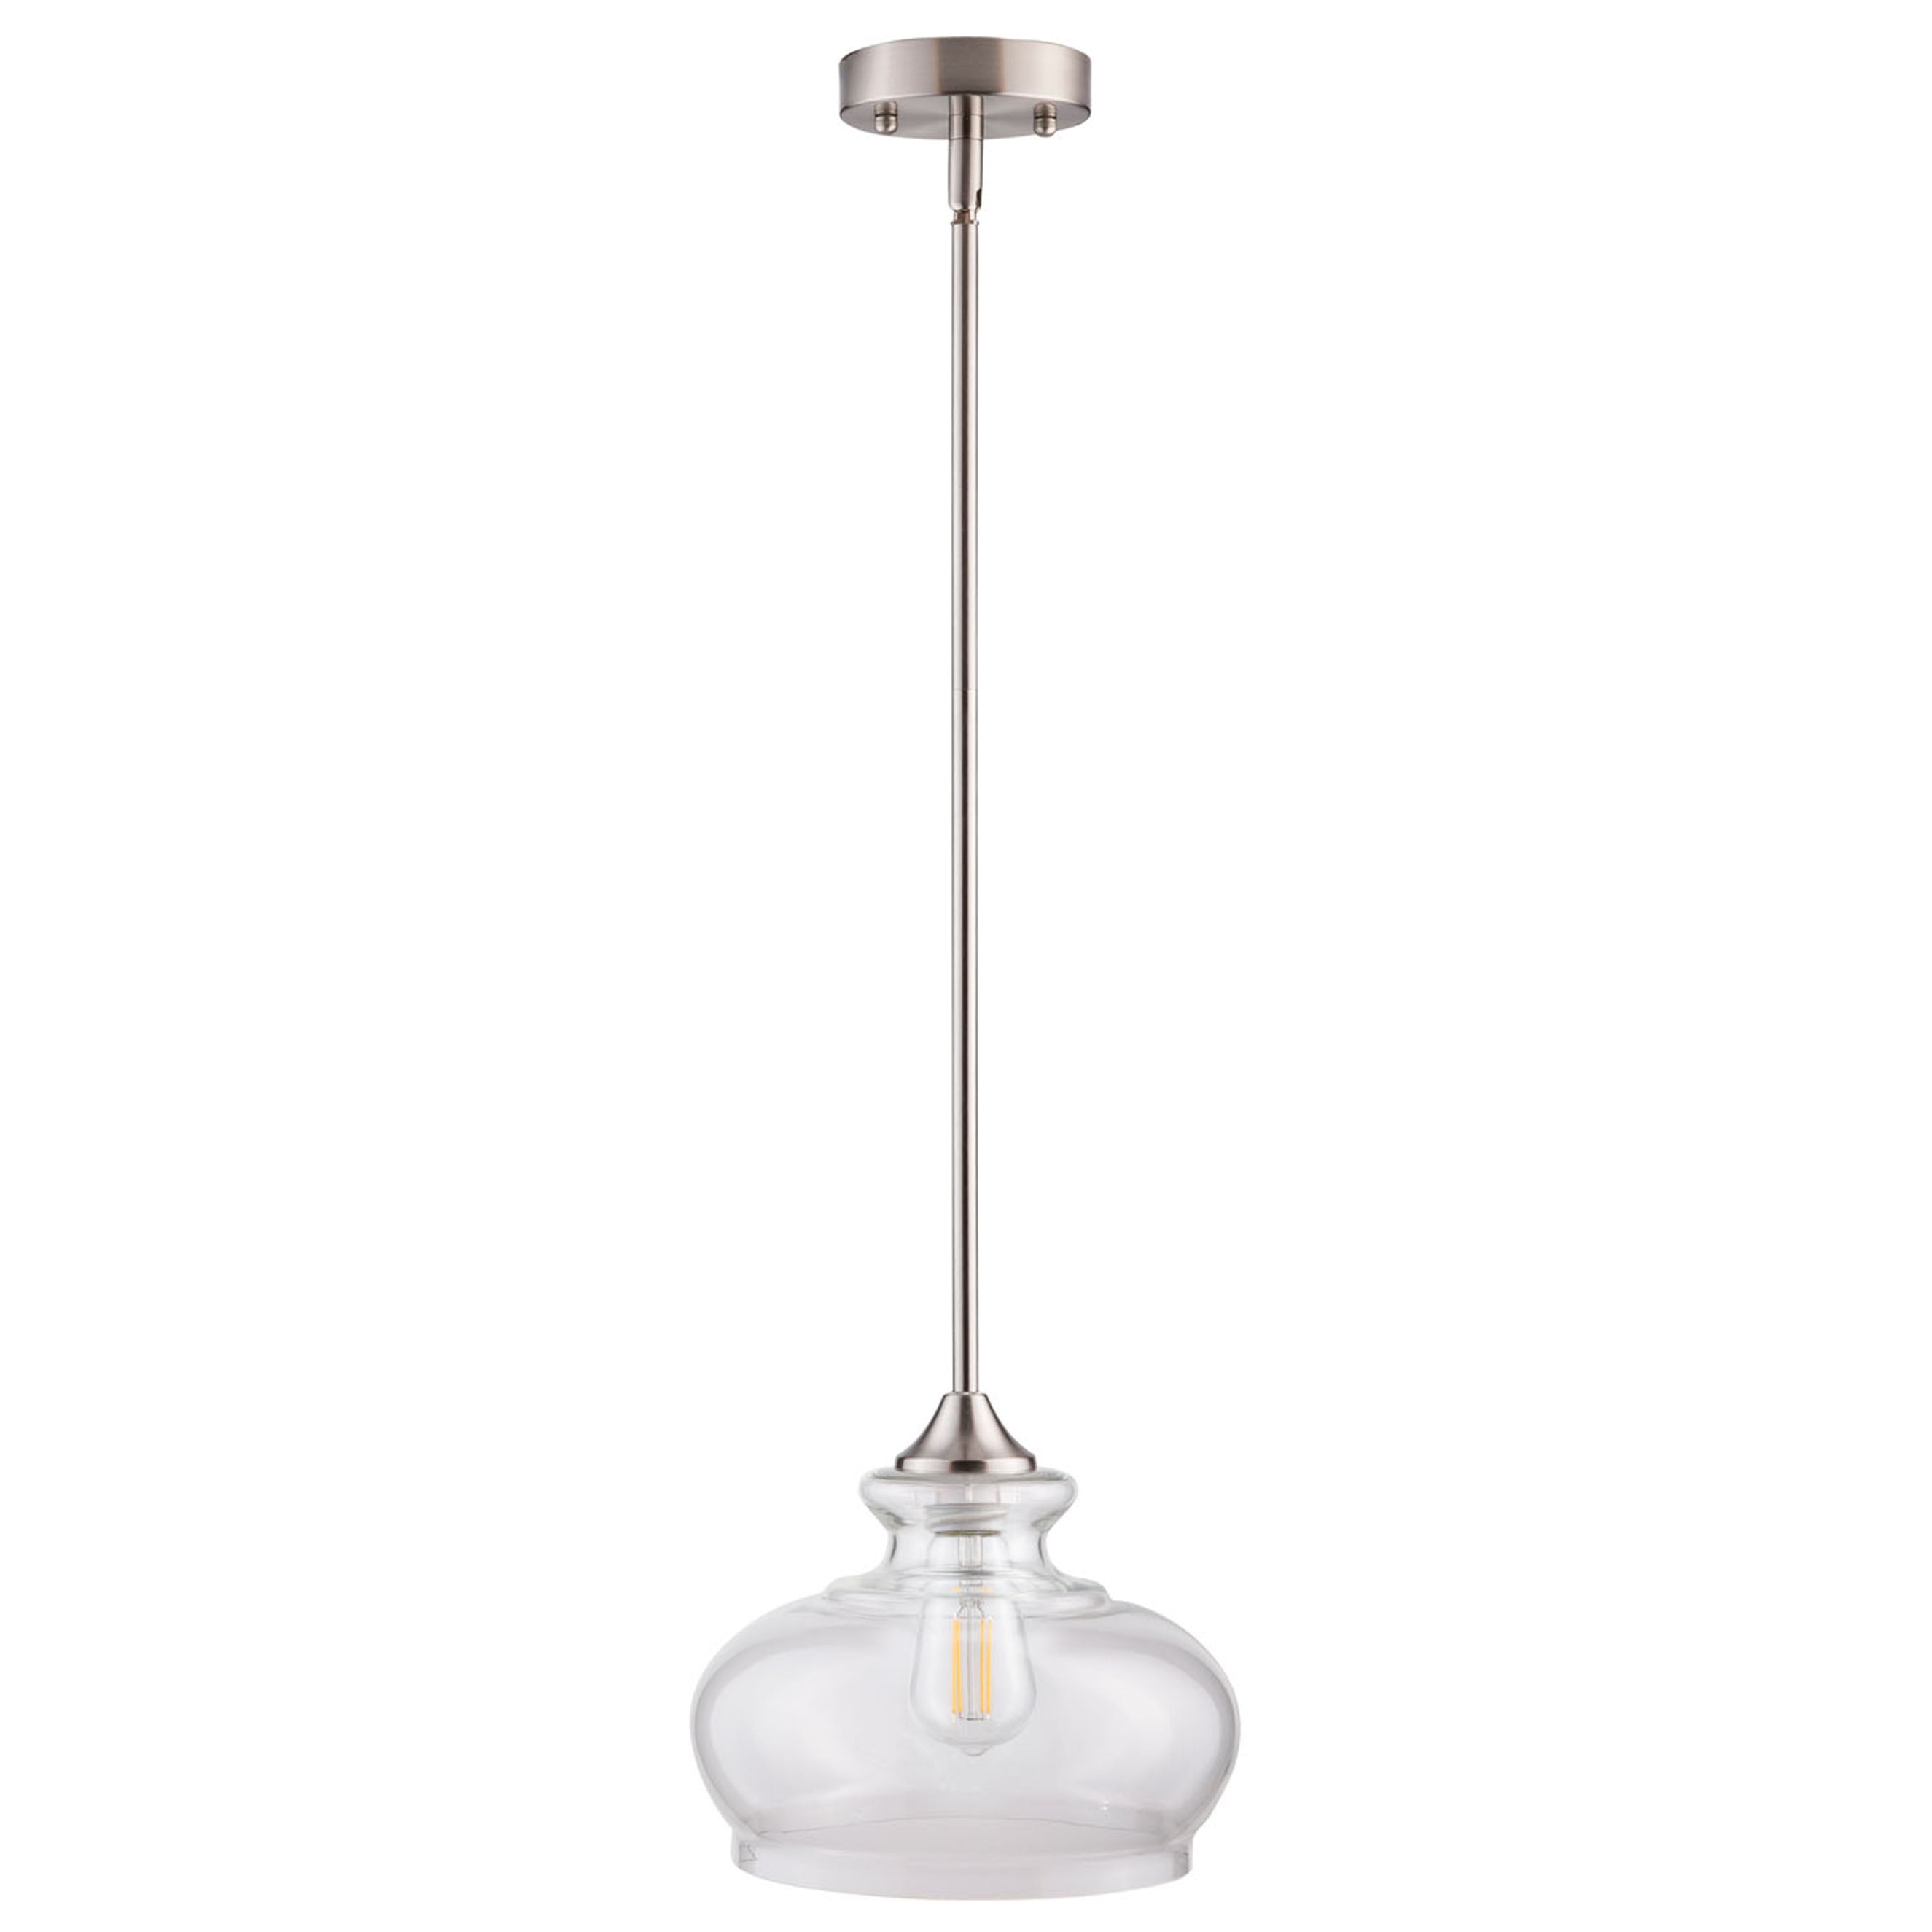 Ariella Ovale Pendant included Linea | LED Light, | bulb Residential and Affordable Lighting Modern Lighting